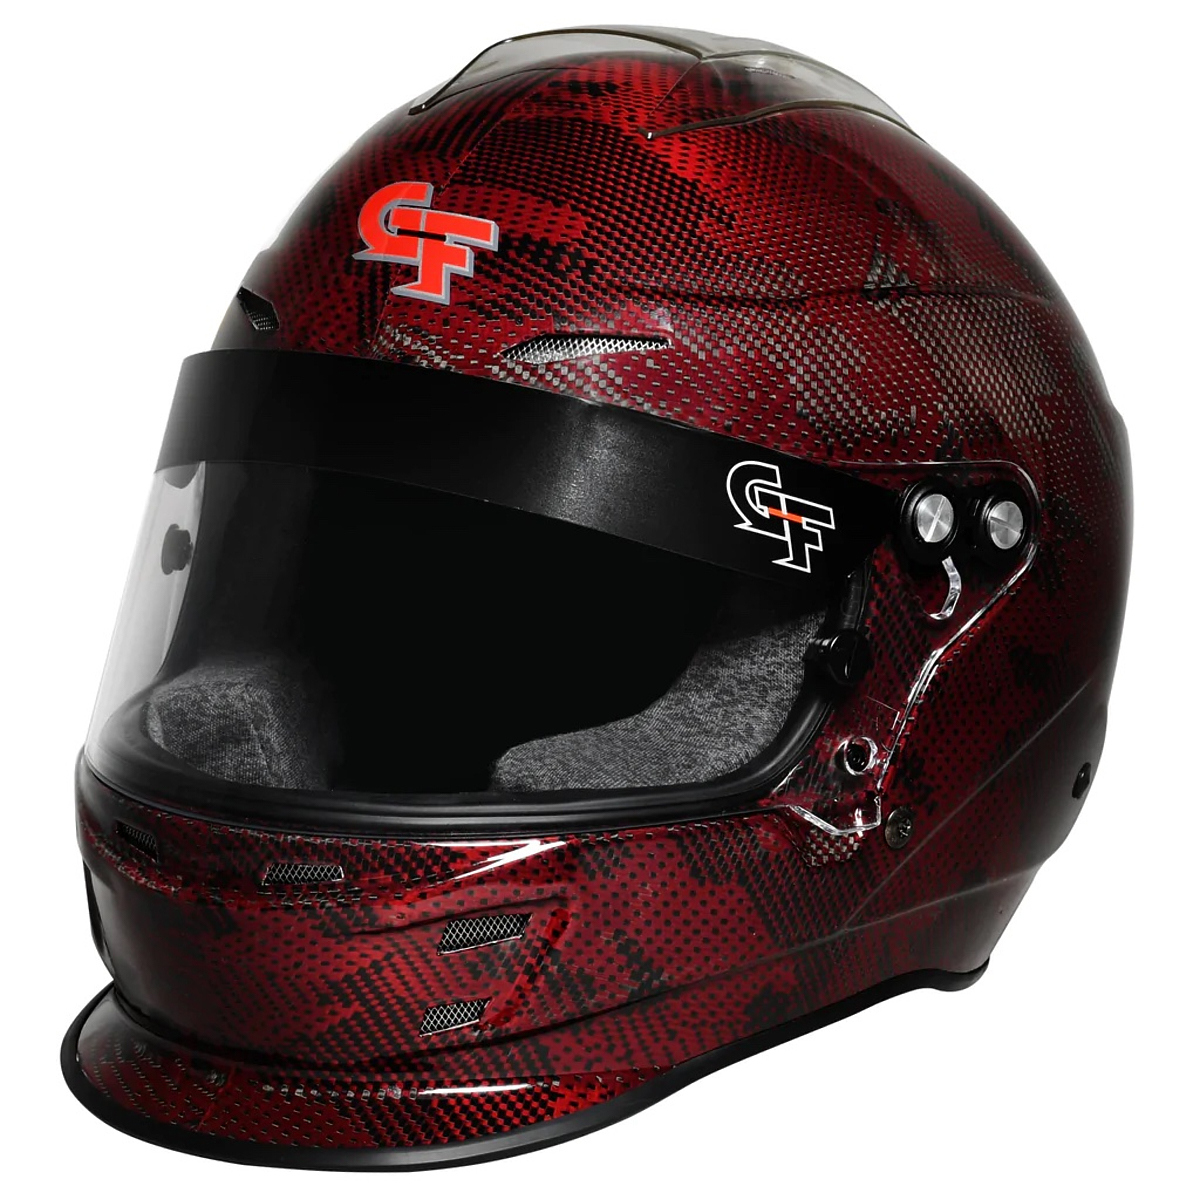 G-Force Racing Gear 16005XXLRD Helmet, Nova Fusion, Full Face, Snell SA 2020, Head and Neck Support Ready, Red, 2X-Large, Each